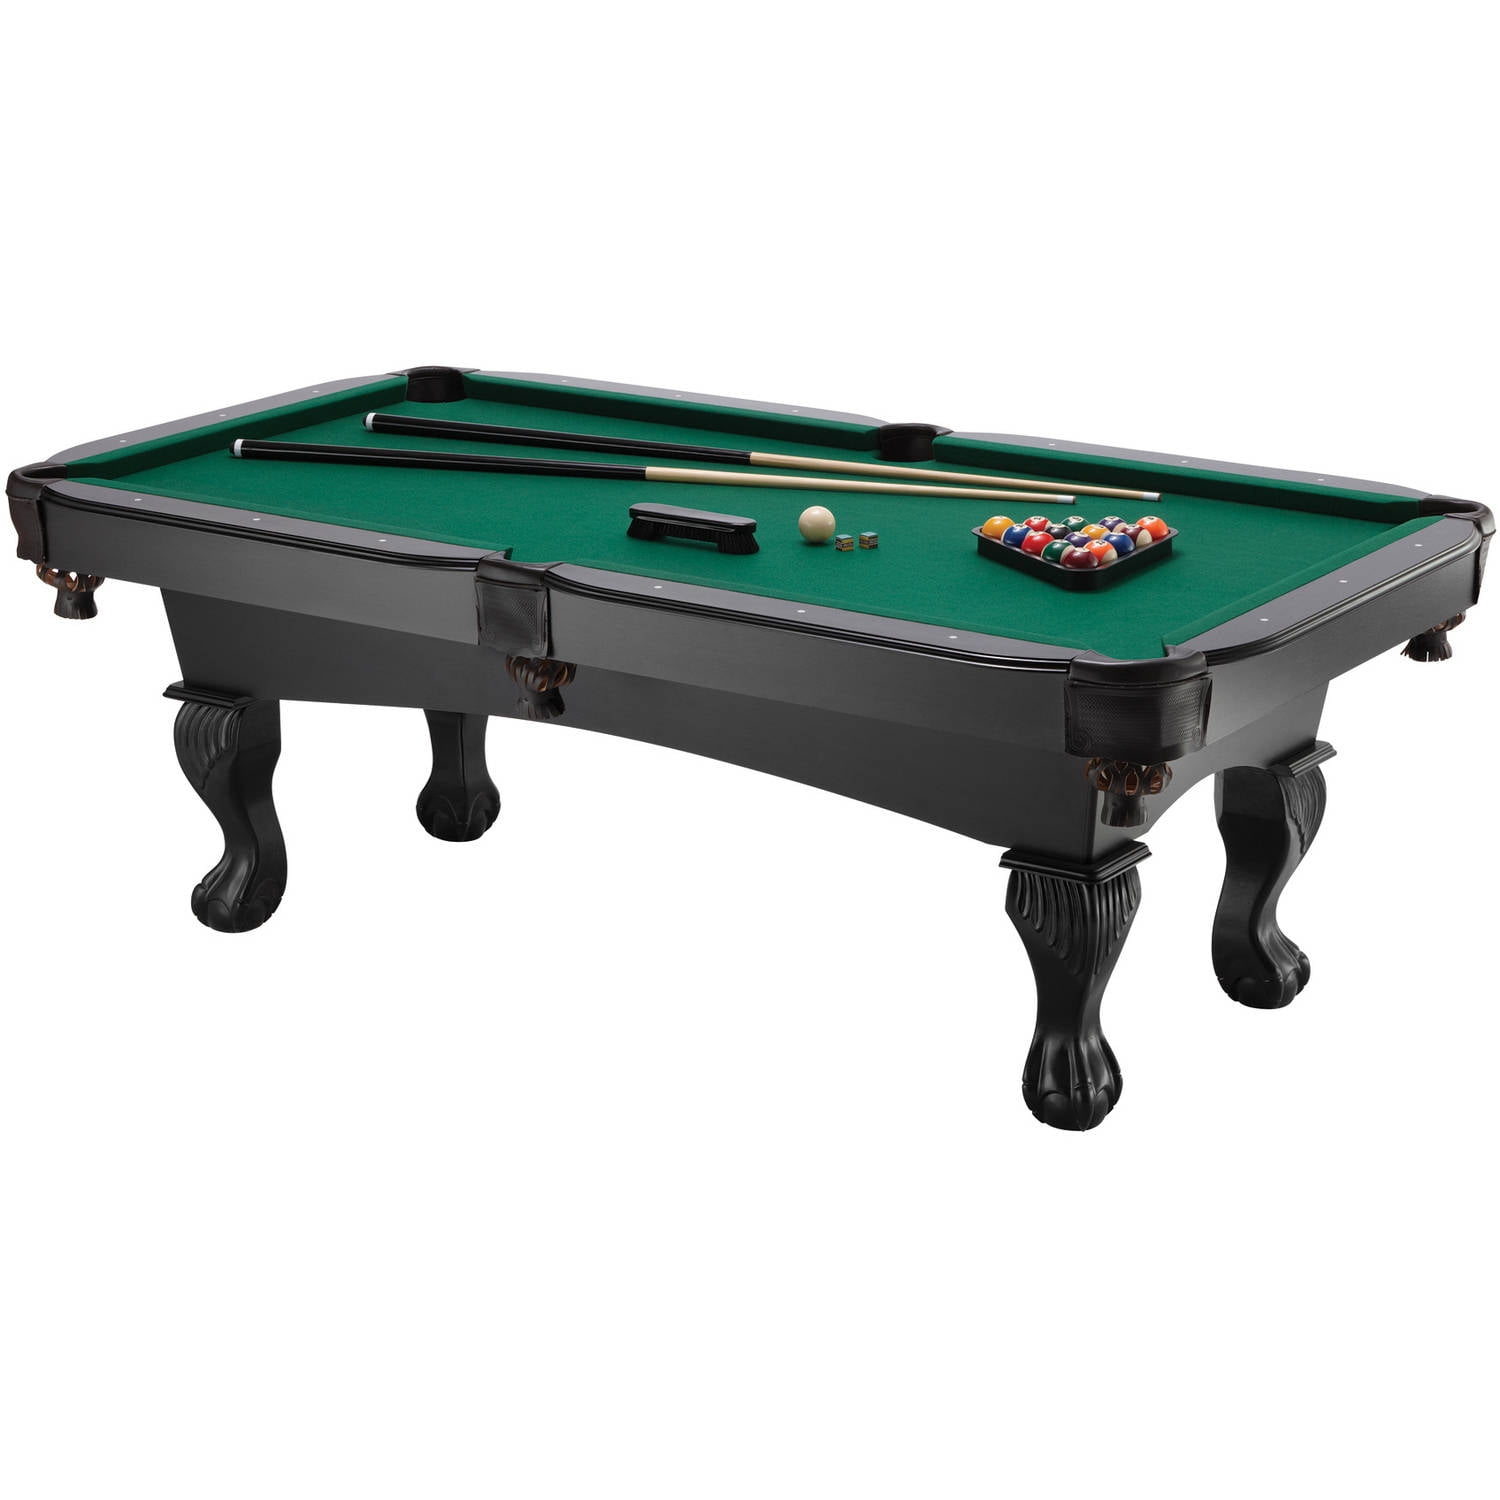 Fat Cat 7 Foot Kansas Billiards Table with Ball and Claw Legs